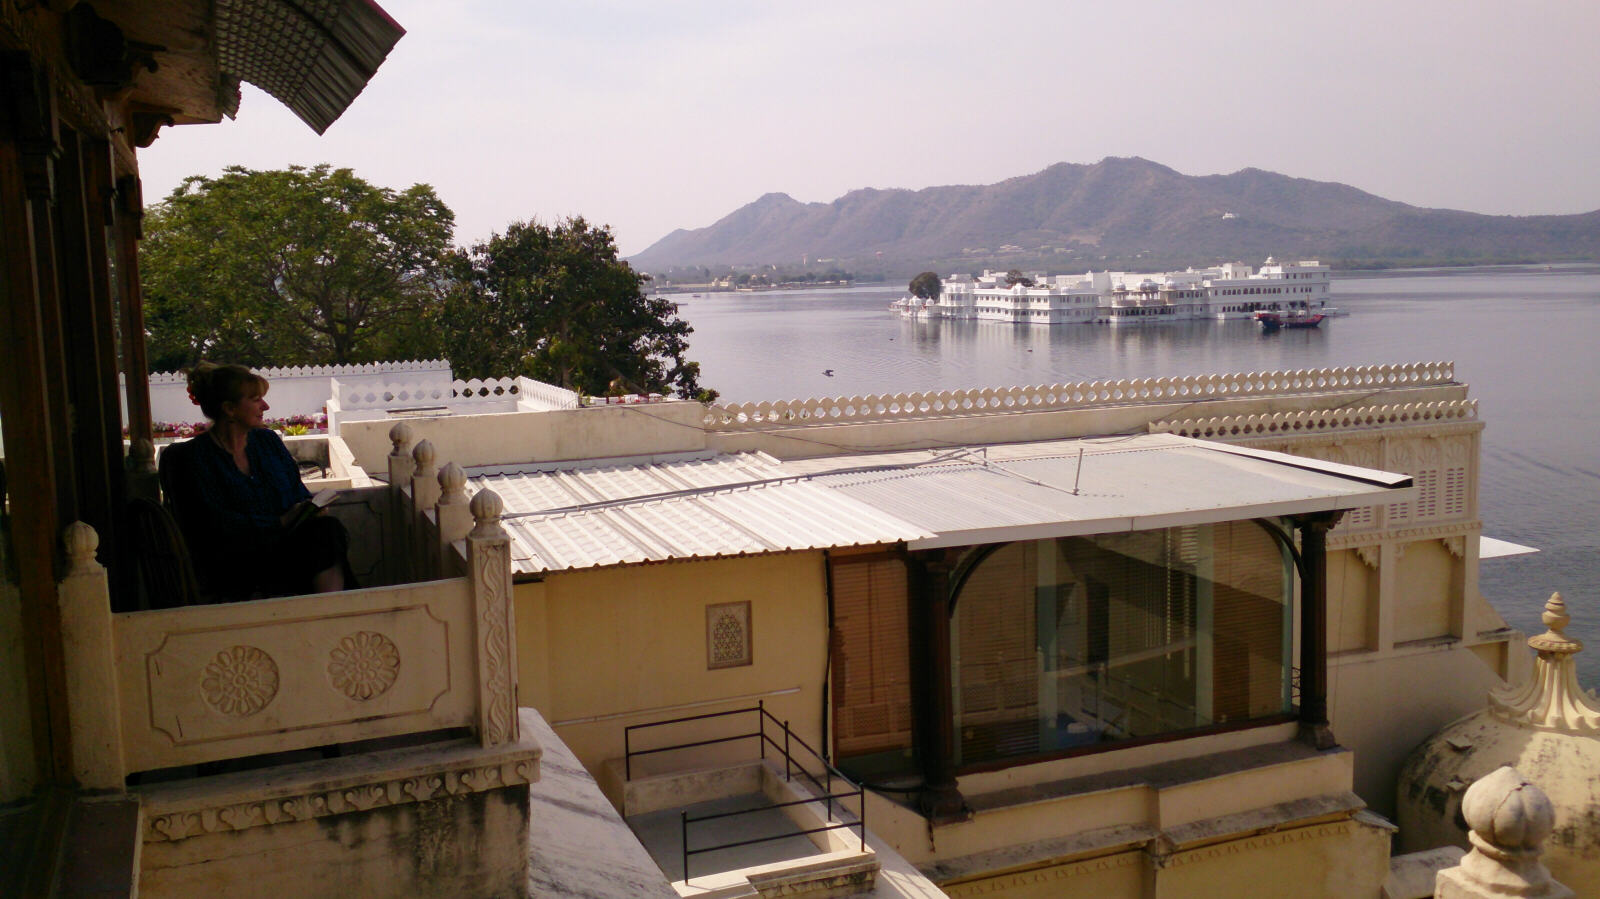 View of the lake and palace from Kankarwa Haveli, Udaipur, Rajasthan